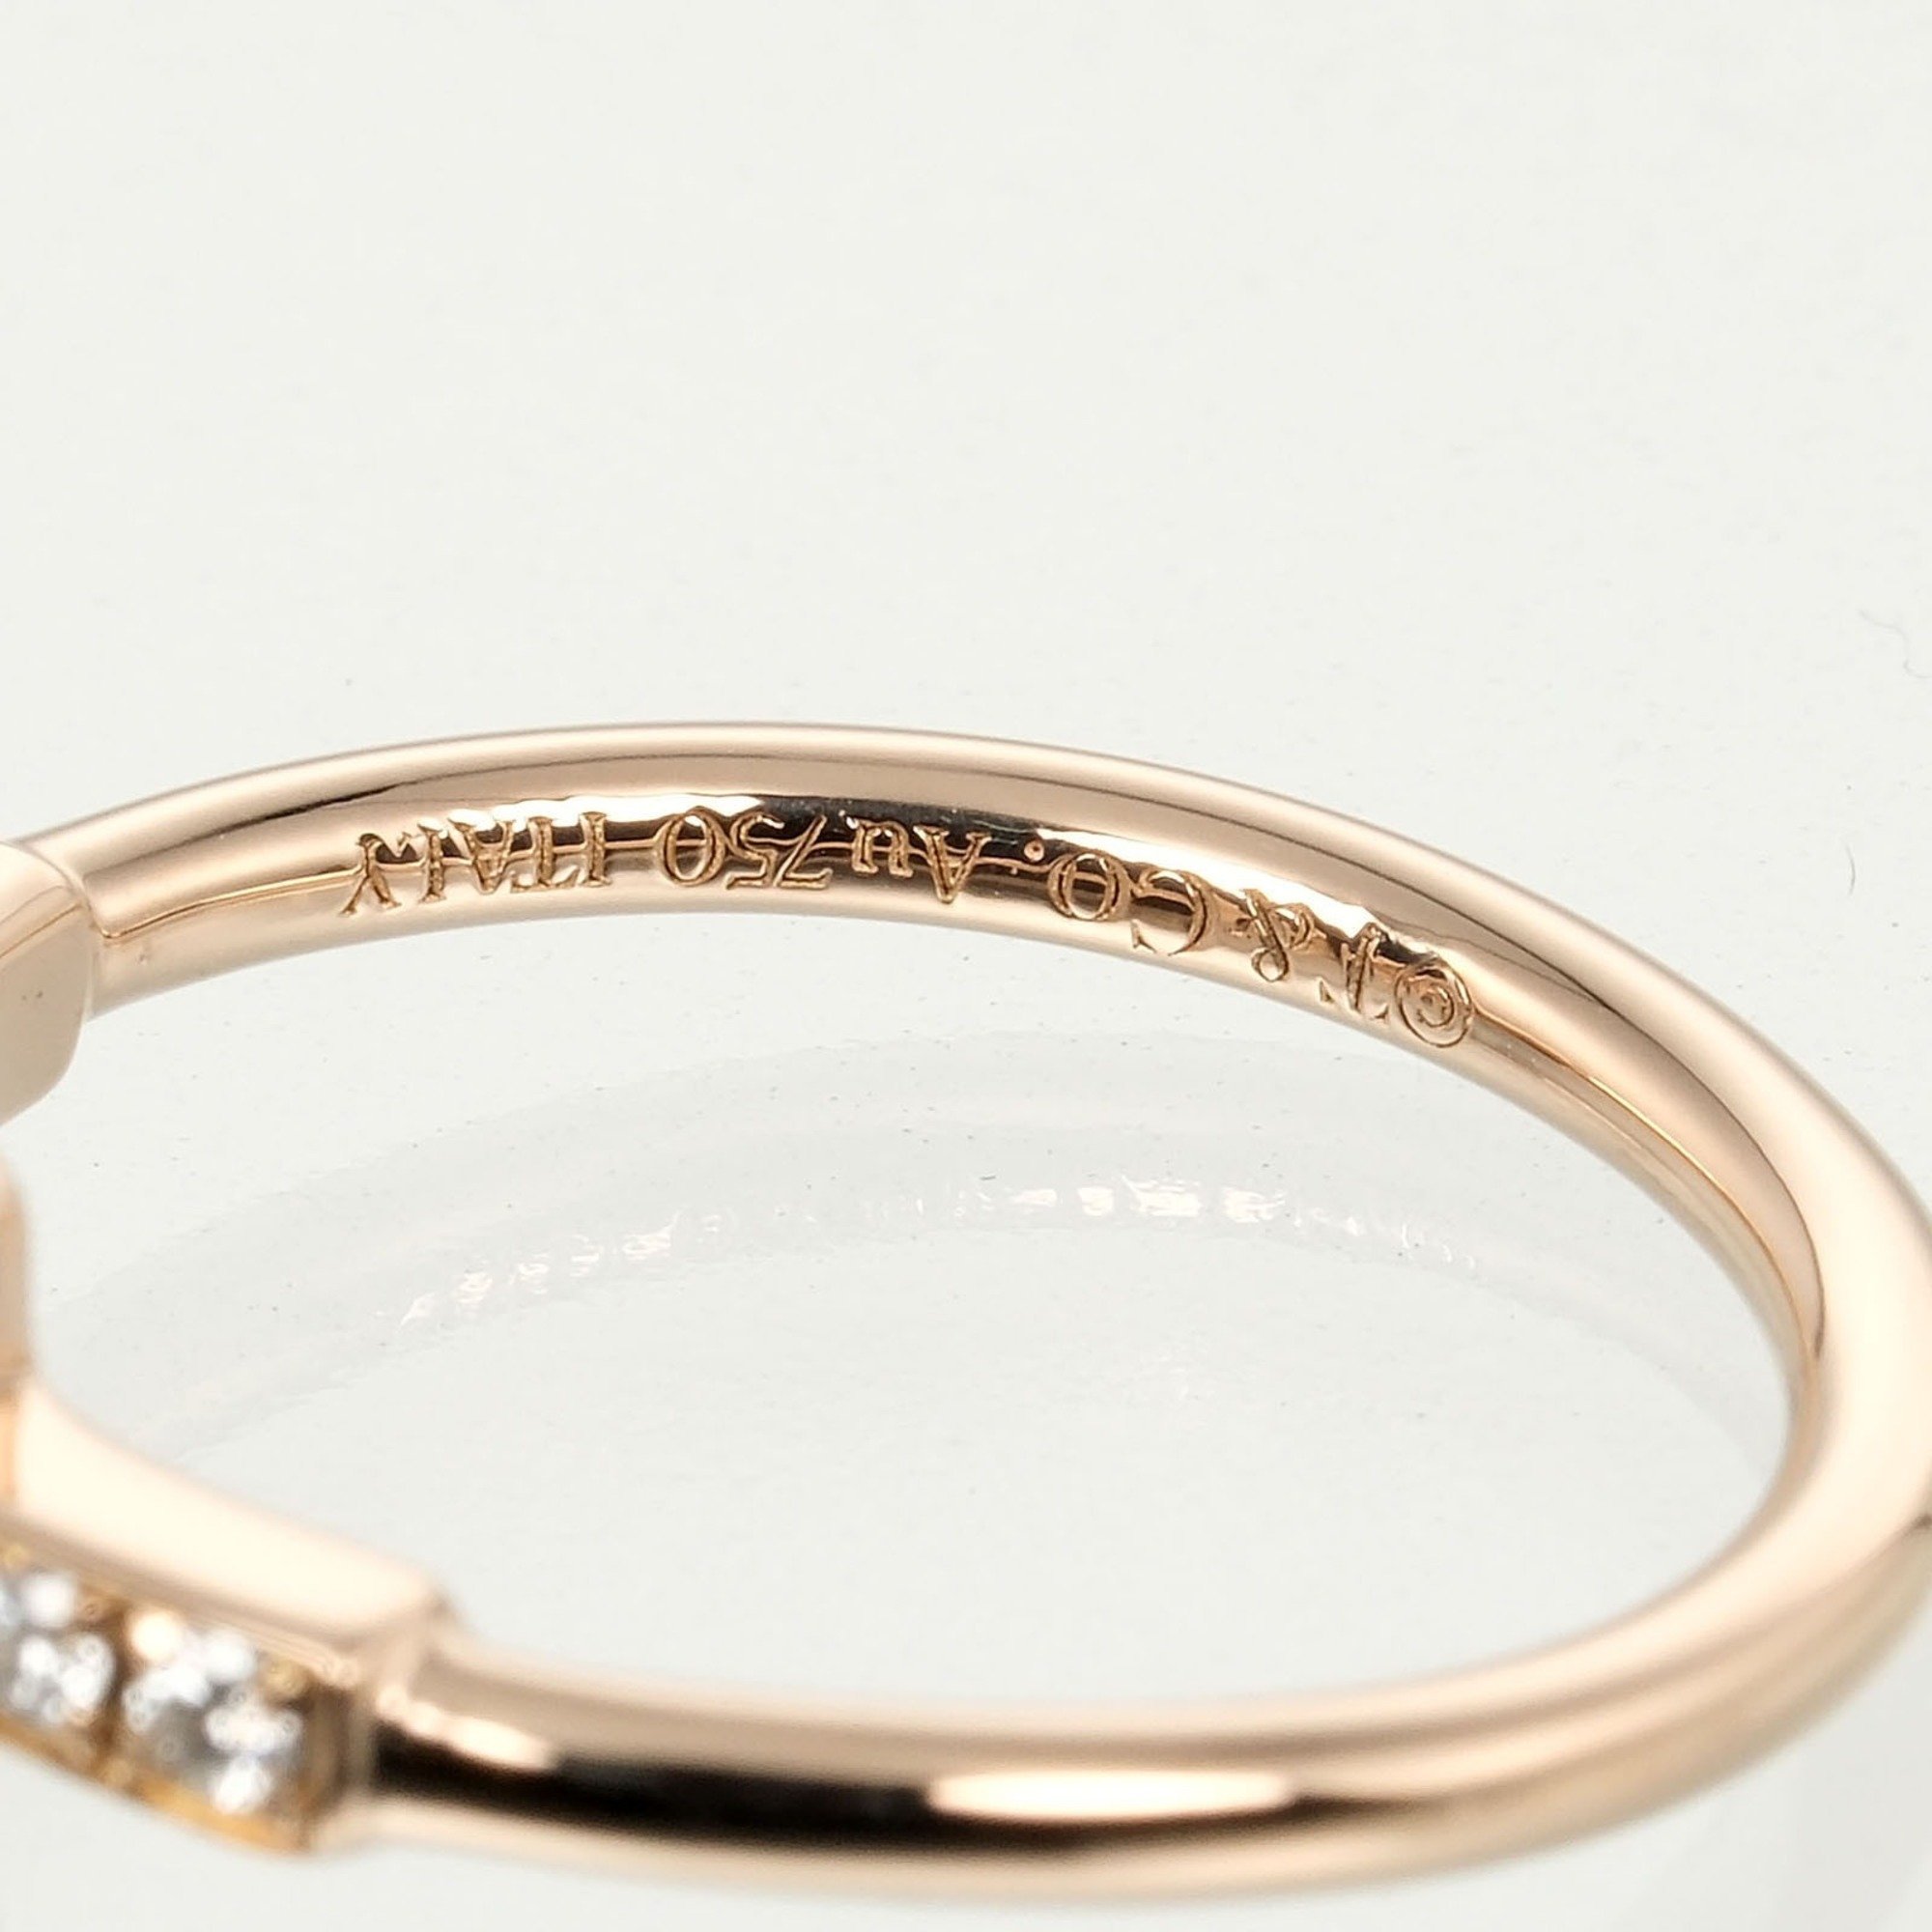 Tiffany & Co. T-Wire Ring, Size 6, K18 PG Pink Gold, 12P Diamond, Approx. 2.1g I132124027